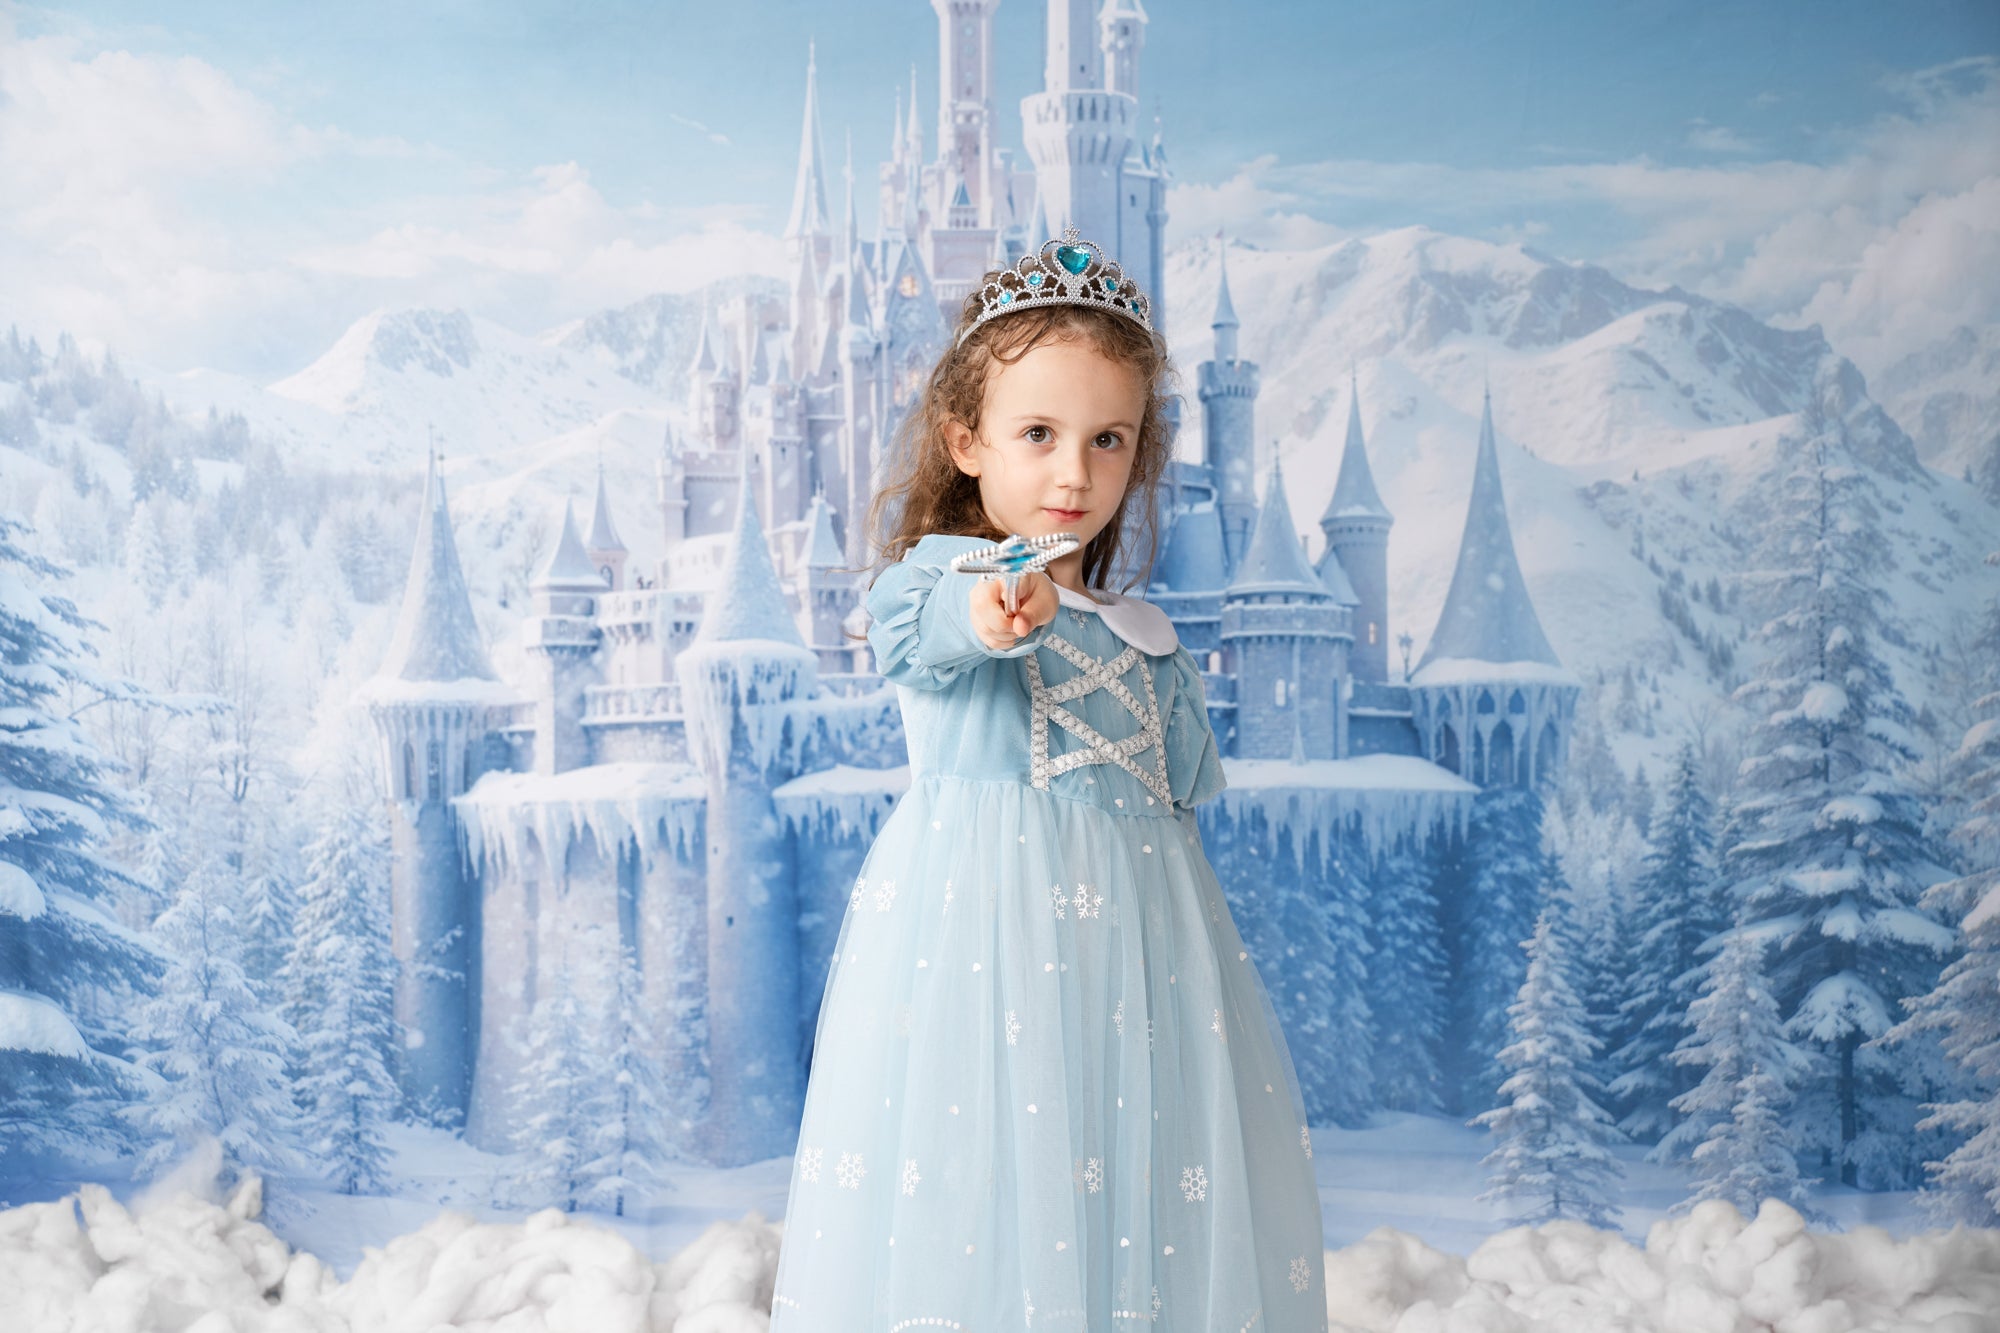 Kate Winter Ice World Castle Backdrop Designed by Chain Photography